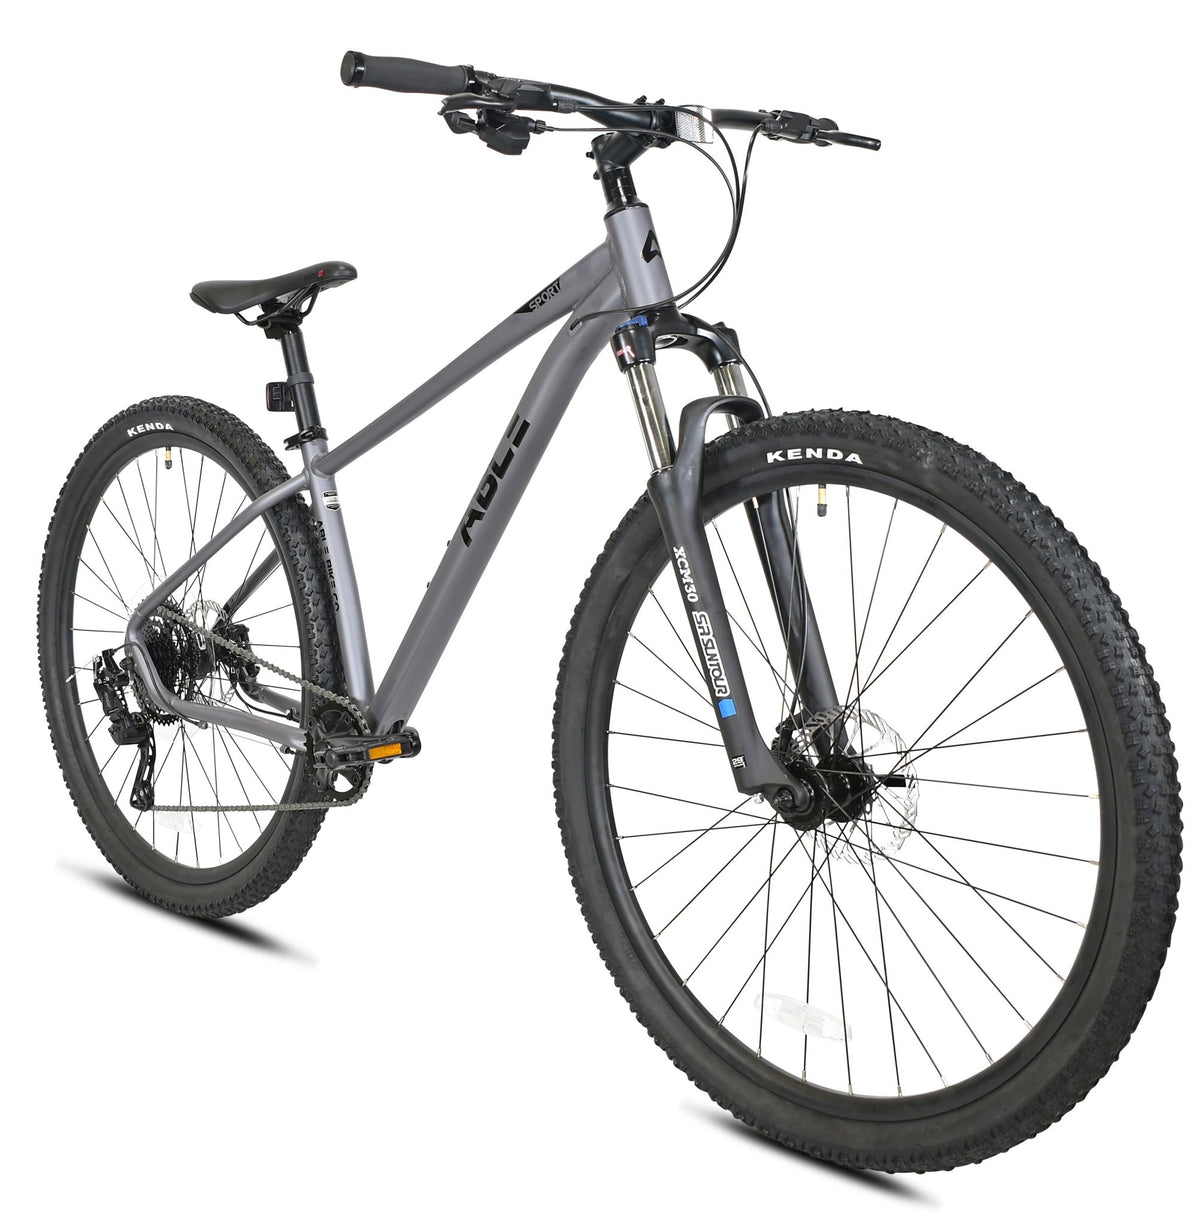 29" ABLE Bike Co. SPORT (Refurbished) - Mountain Bike for Ages 14+